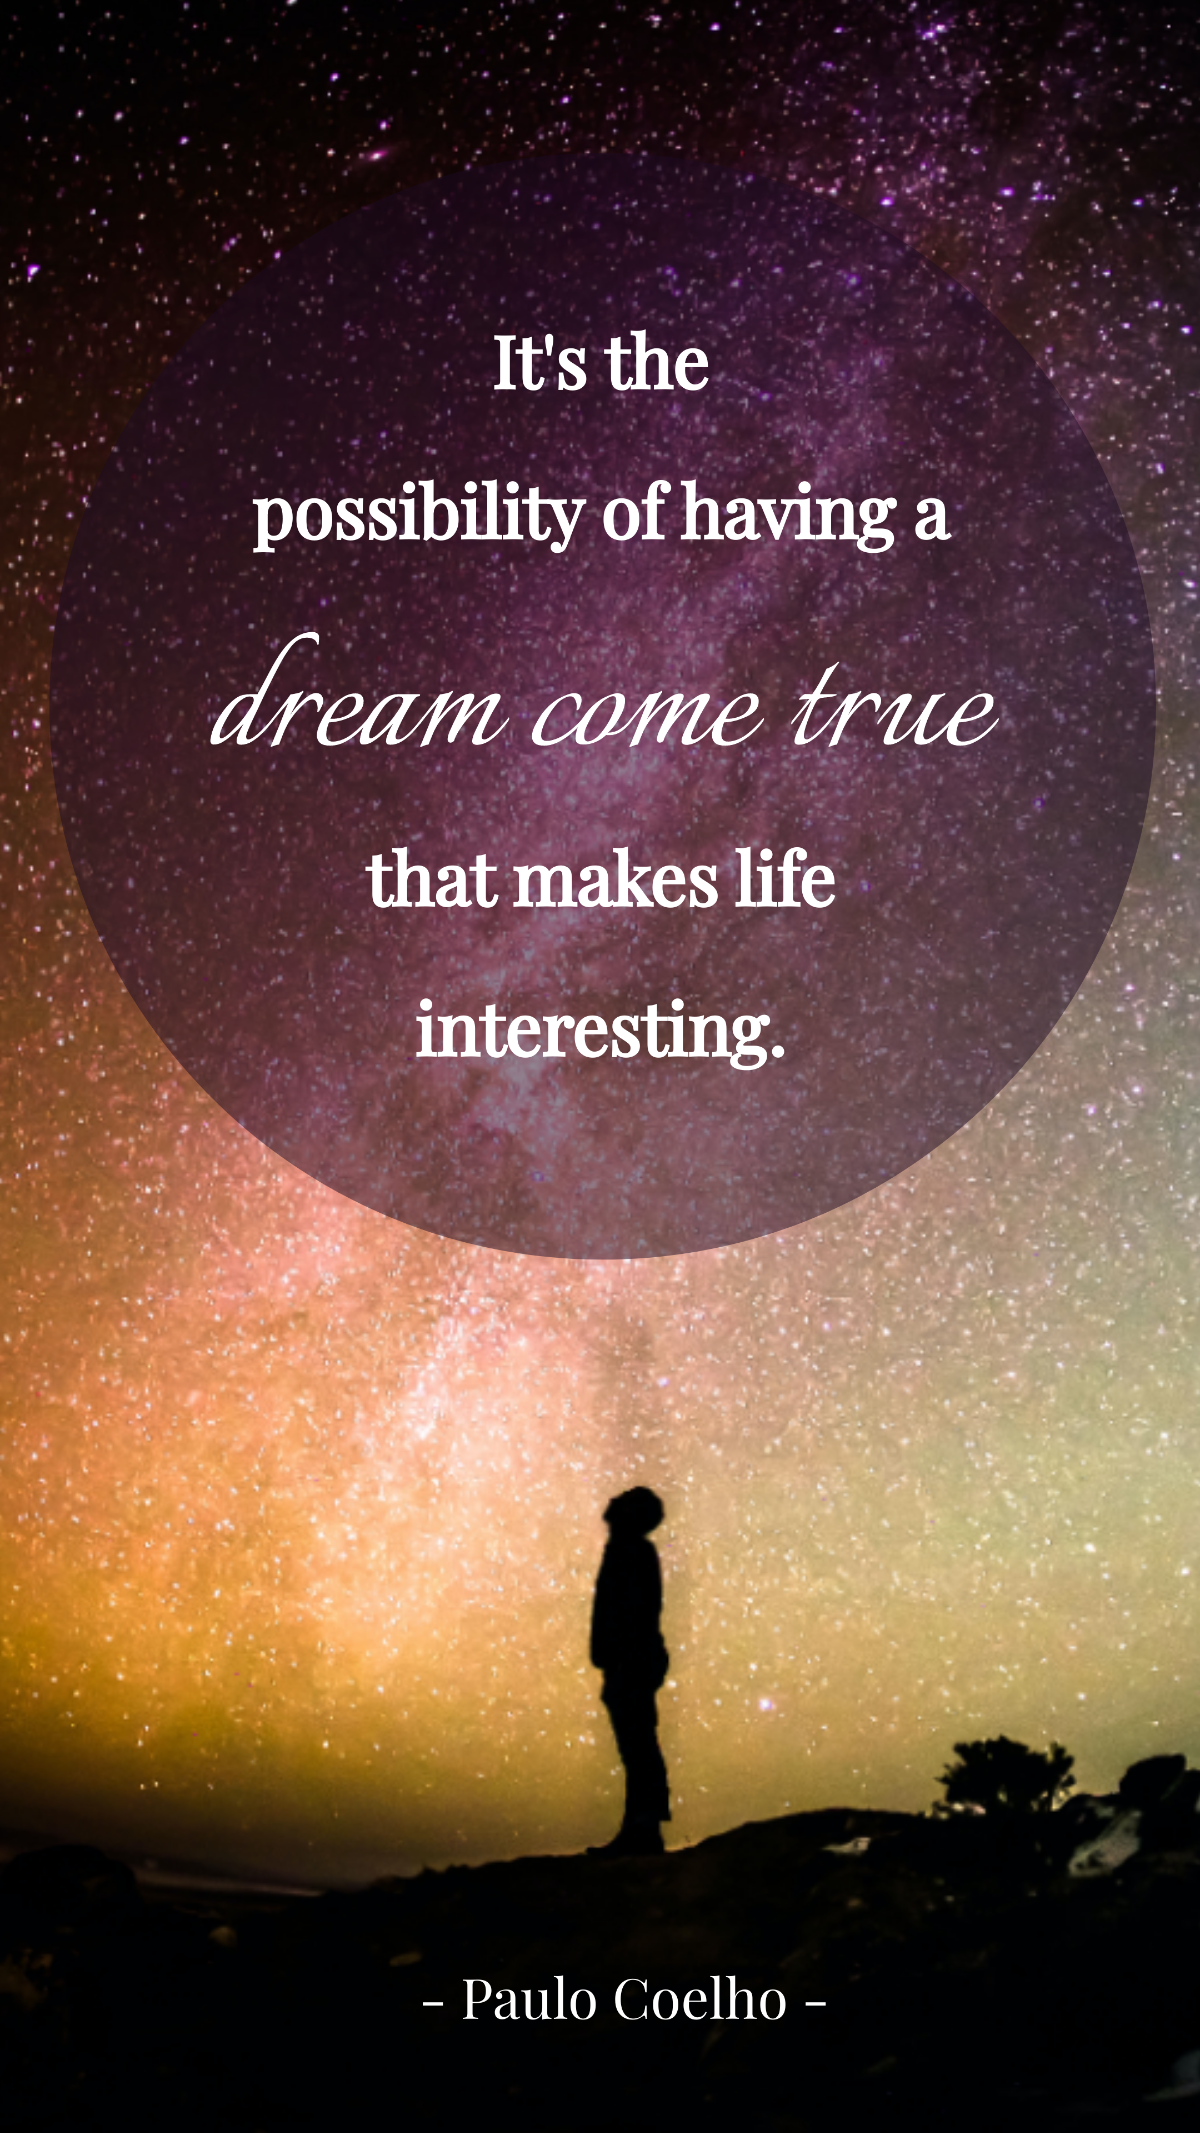 Paulo Coelho - It's the possibility of having a dream come true that makes life interesting. Template